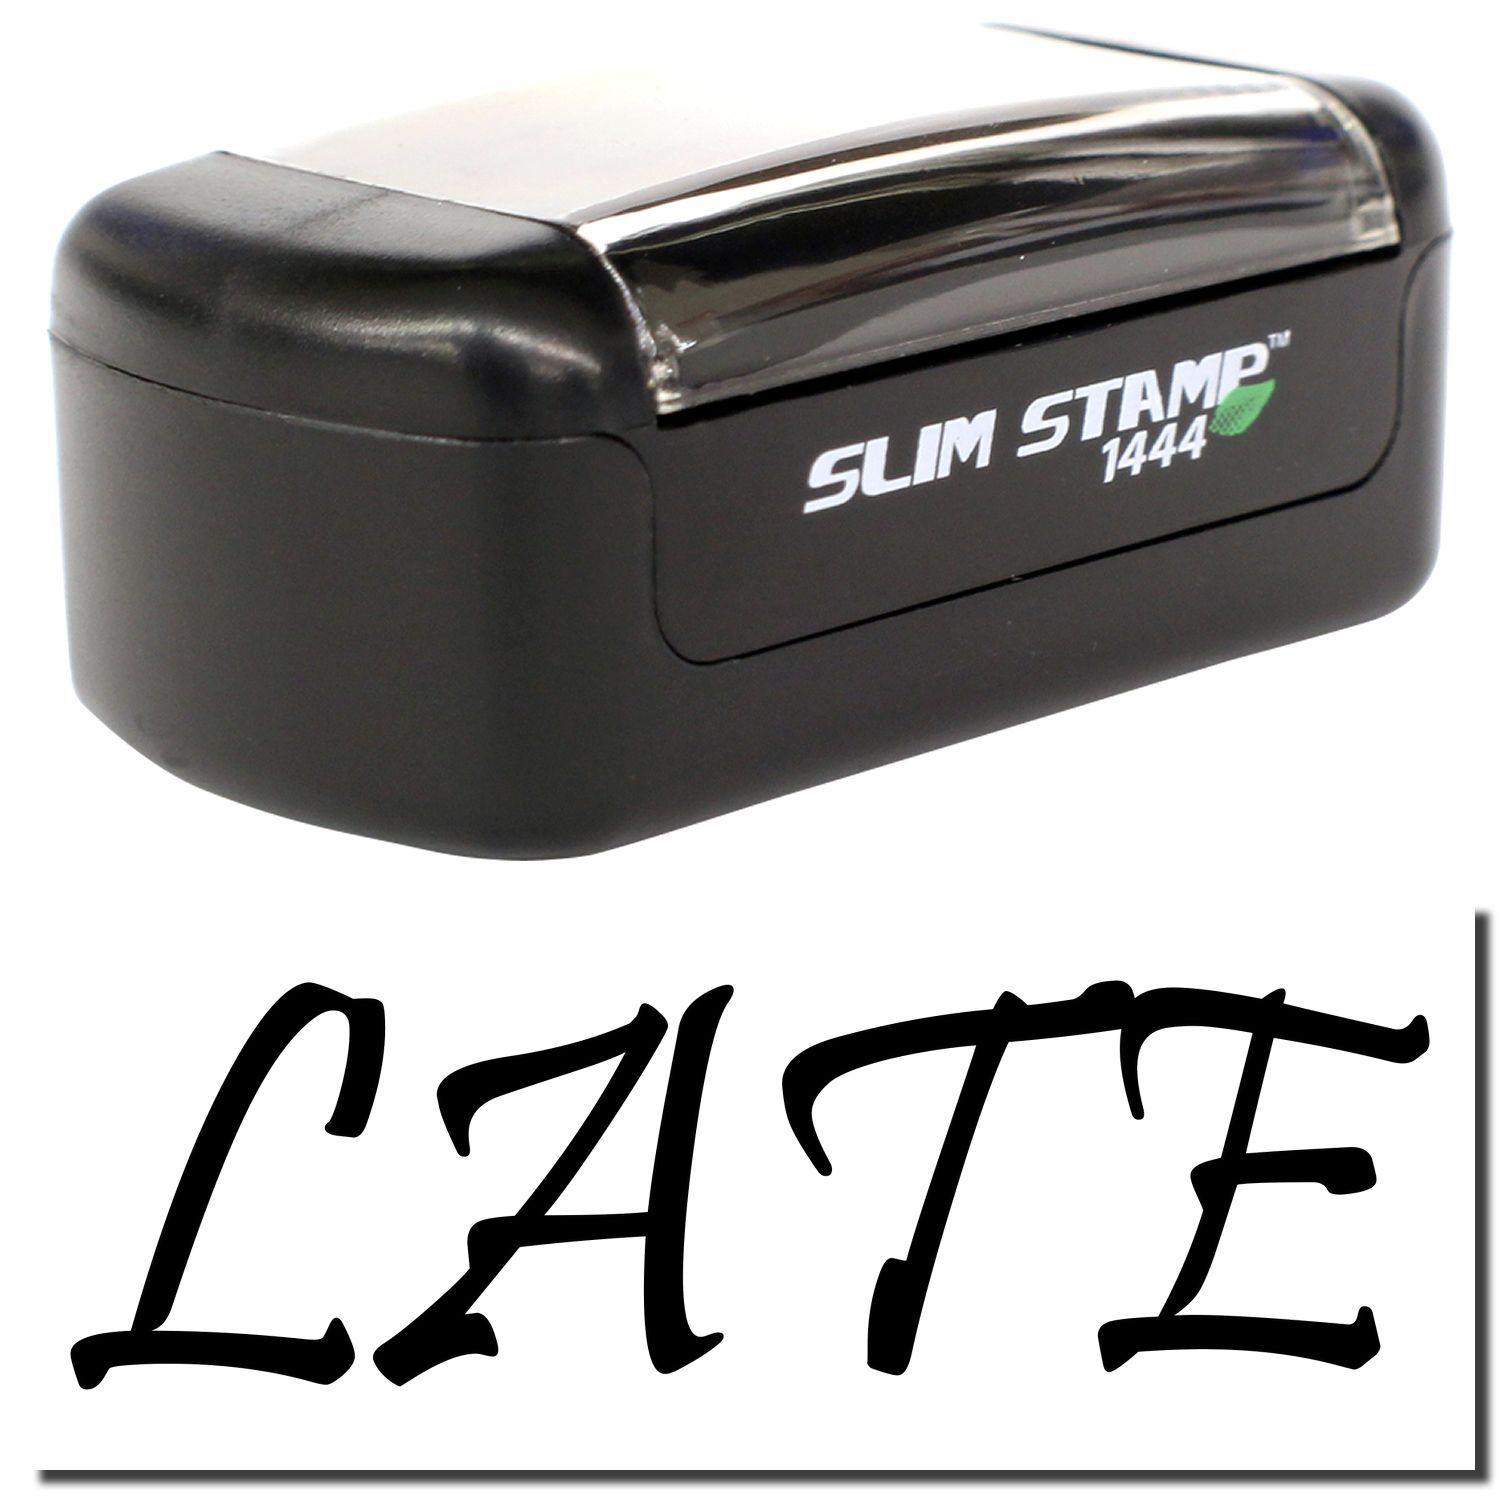 A stock office pre-inked stamp with a stamped image showing how the text "LATE" is displayed after stamping.